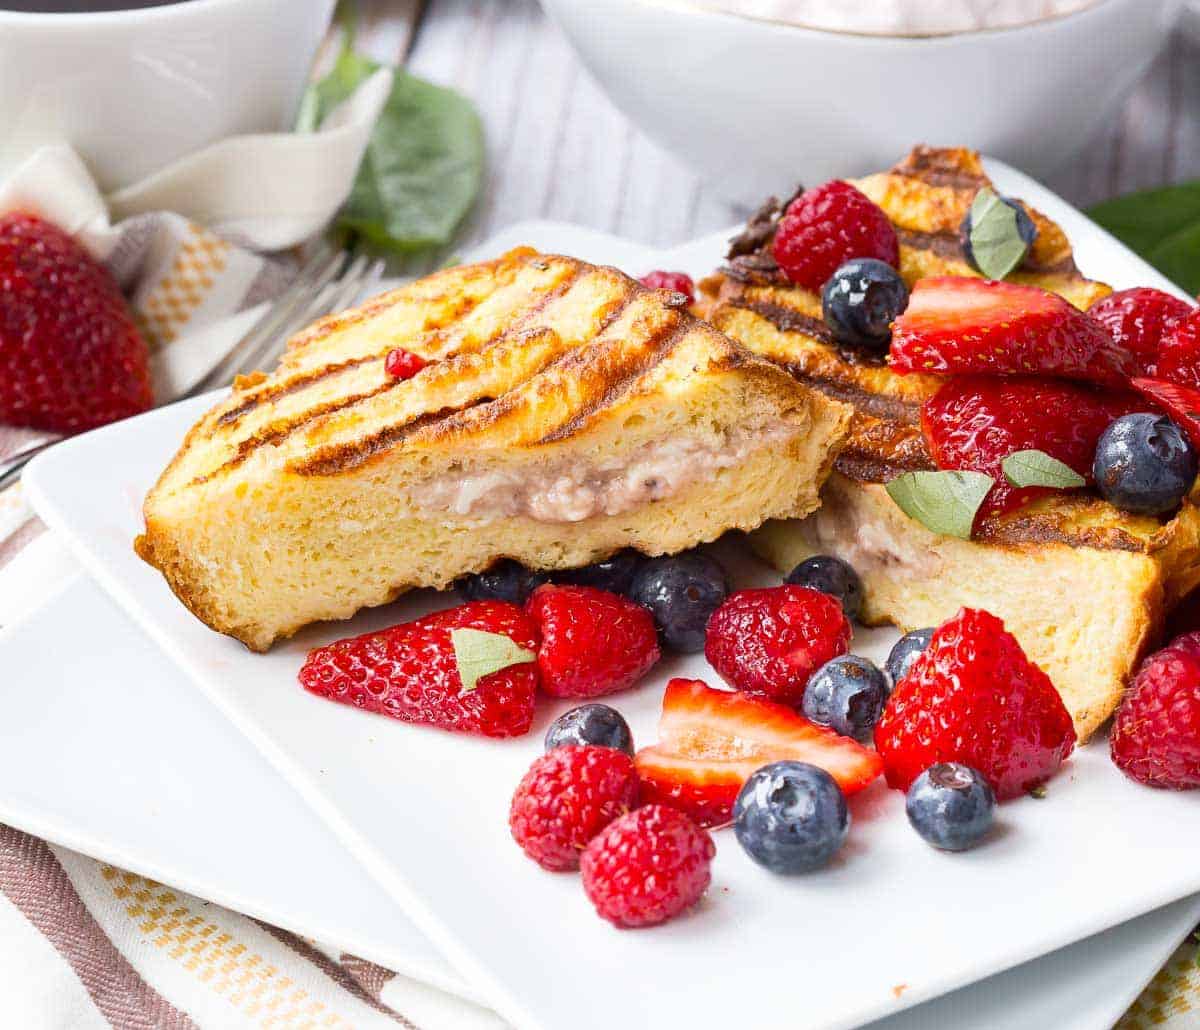 Slices of grilled French toast on a square plate garnished with mixed berries.